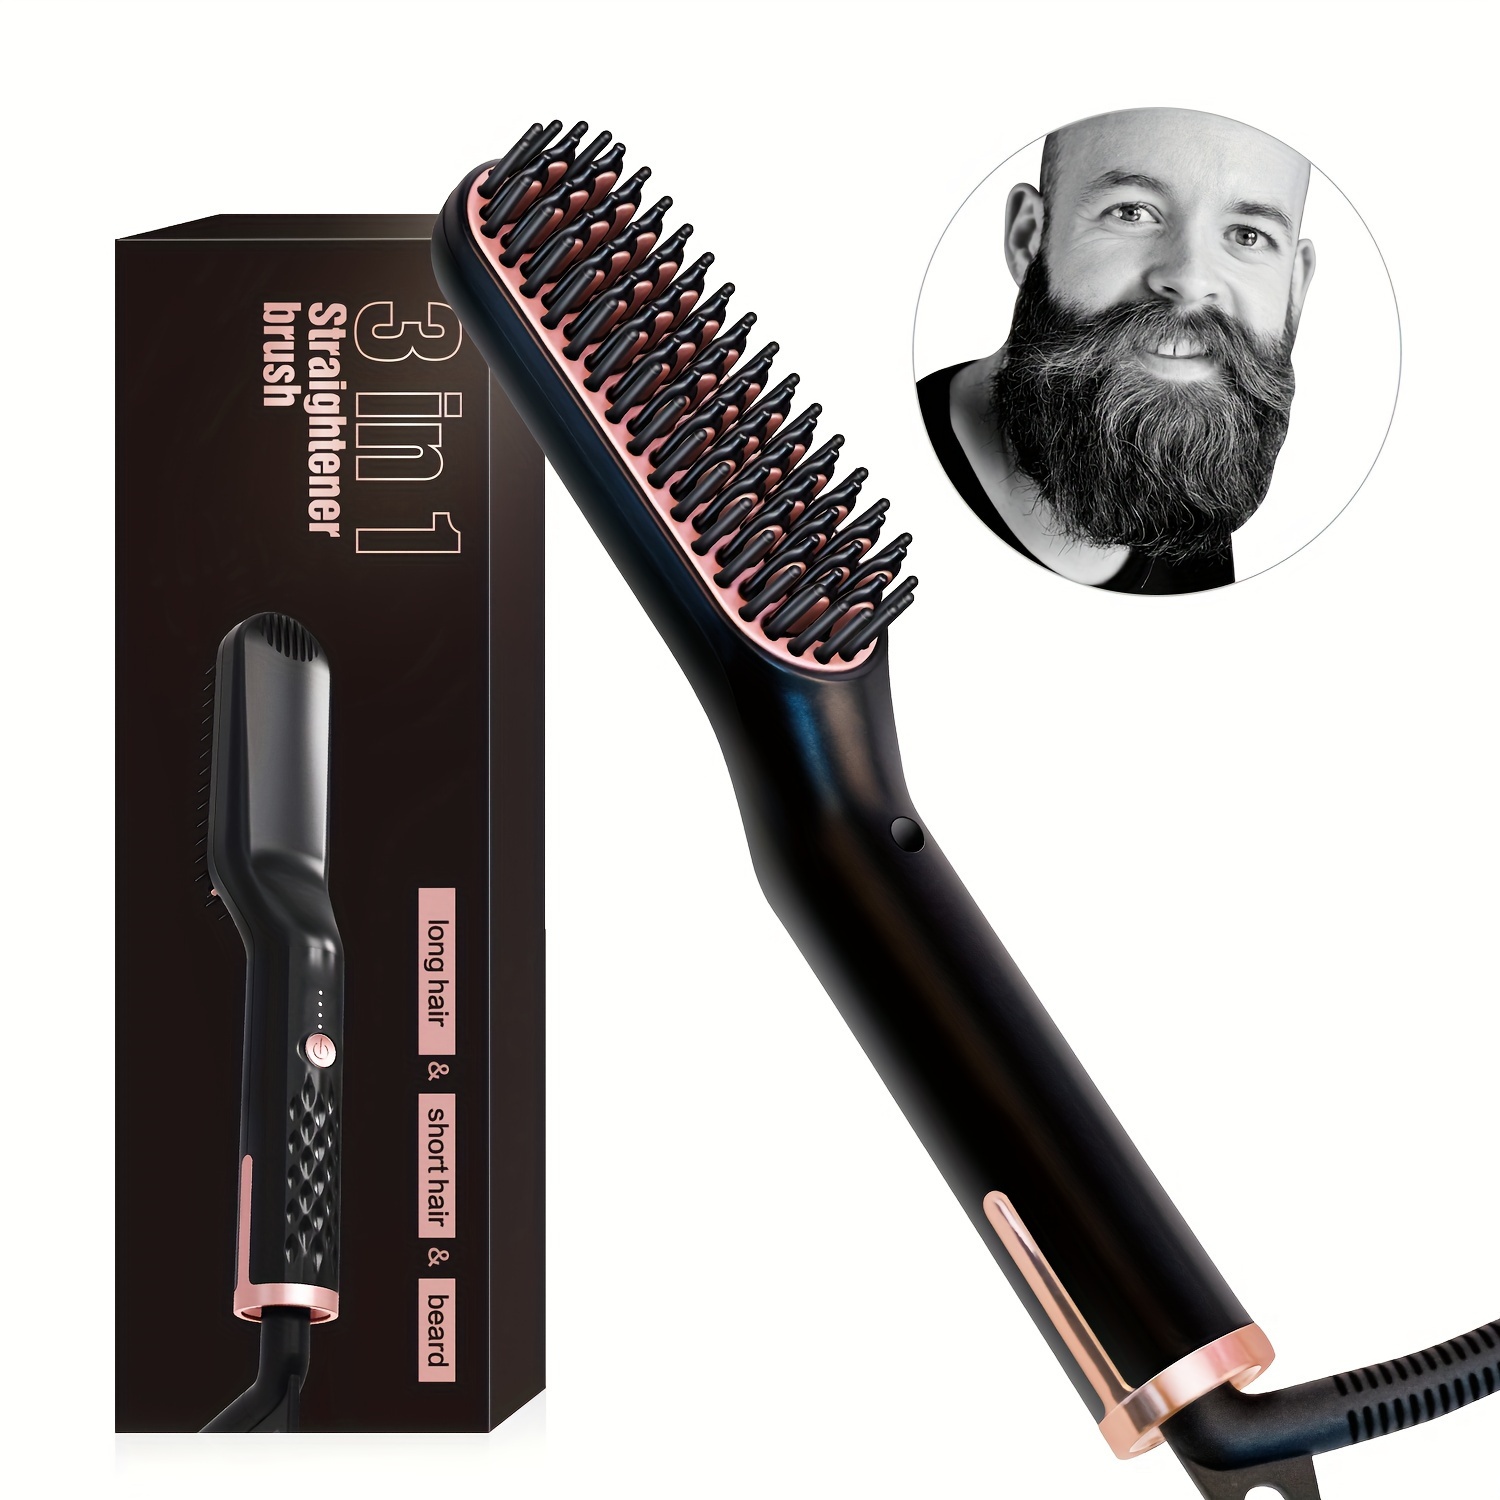 

Beard Straightener For Men - Anti-scald Beard Straightening Comb - Heated Hair Straightener For Men & Women - Portable Electric Beard Brush With Dual Voltage - Holiday Gift